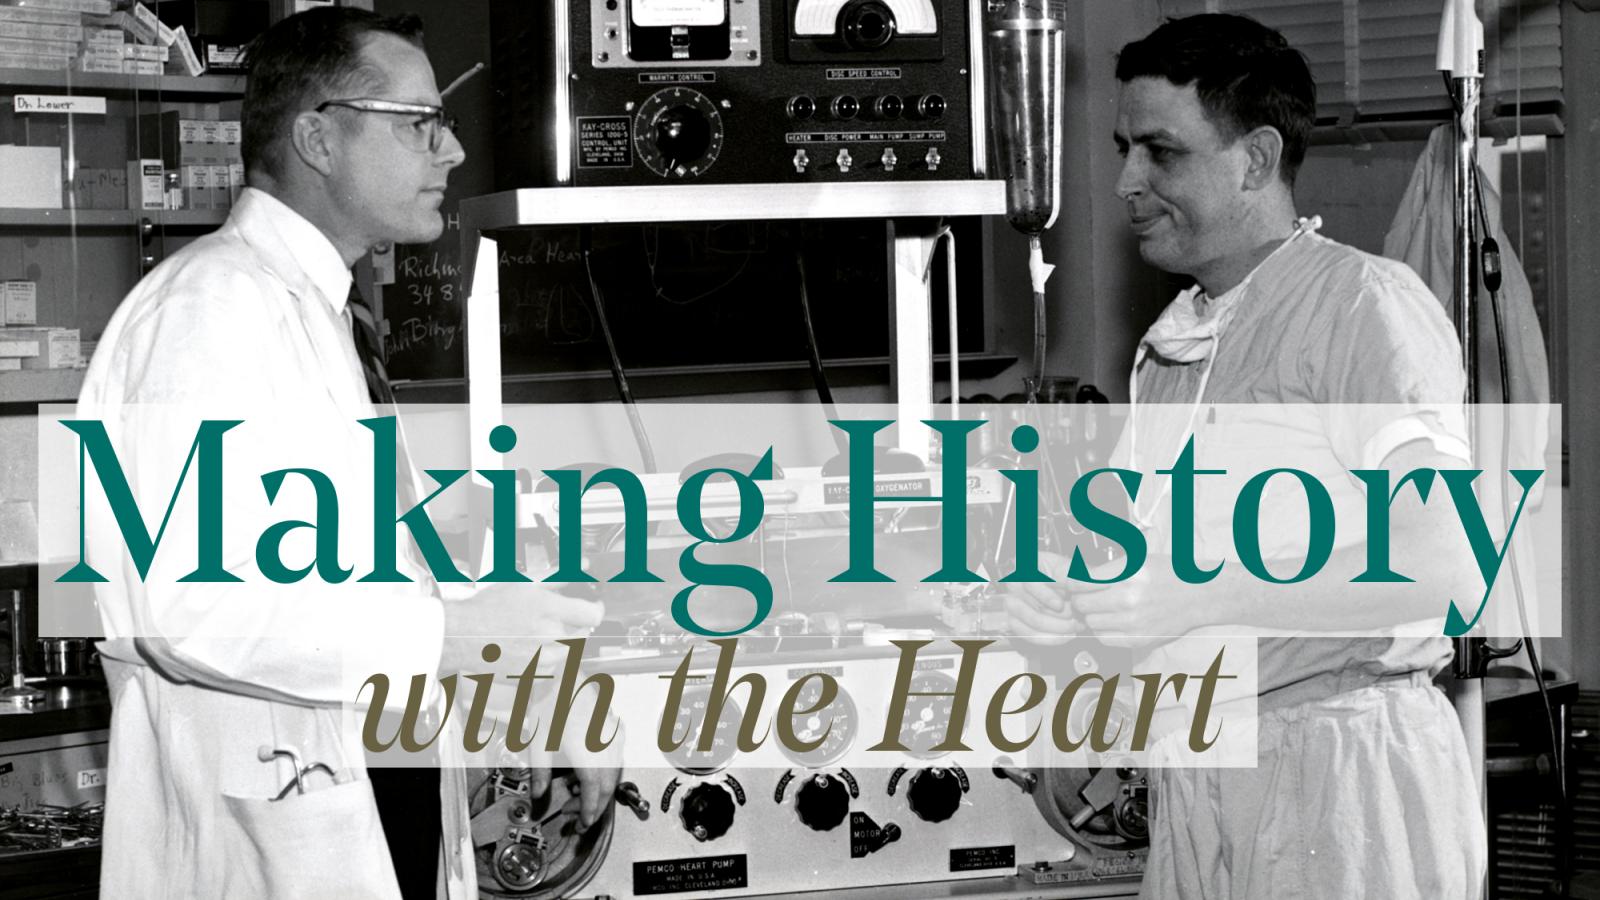 Dr. Lower and Dr. Cleveland "Making History With the Heart"